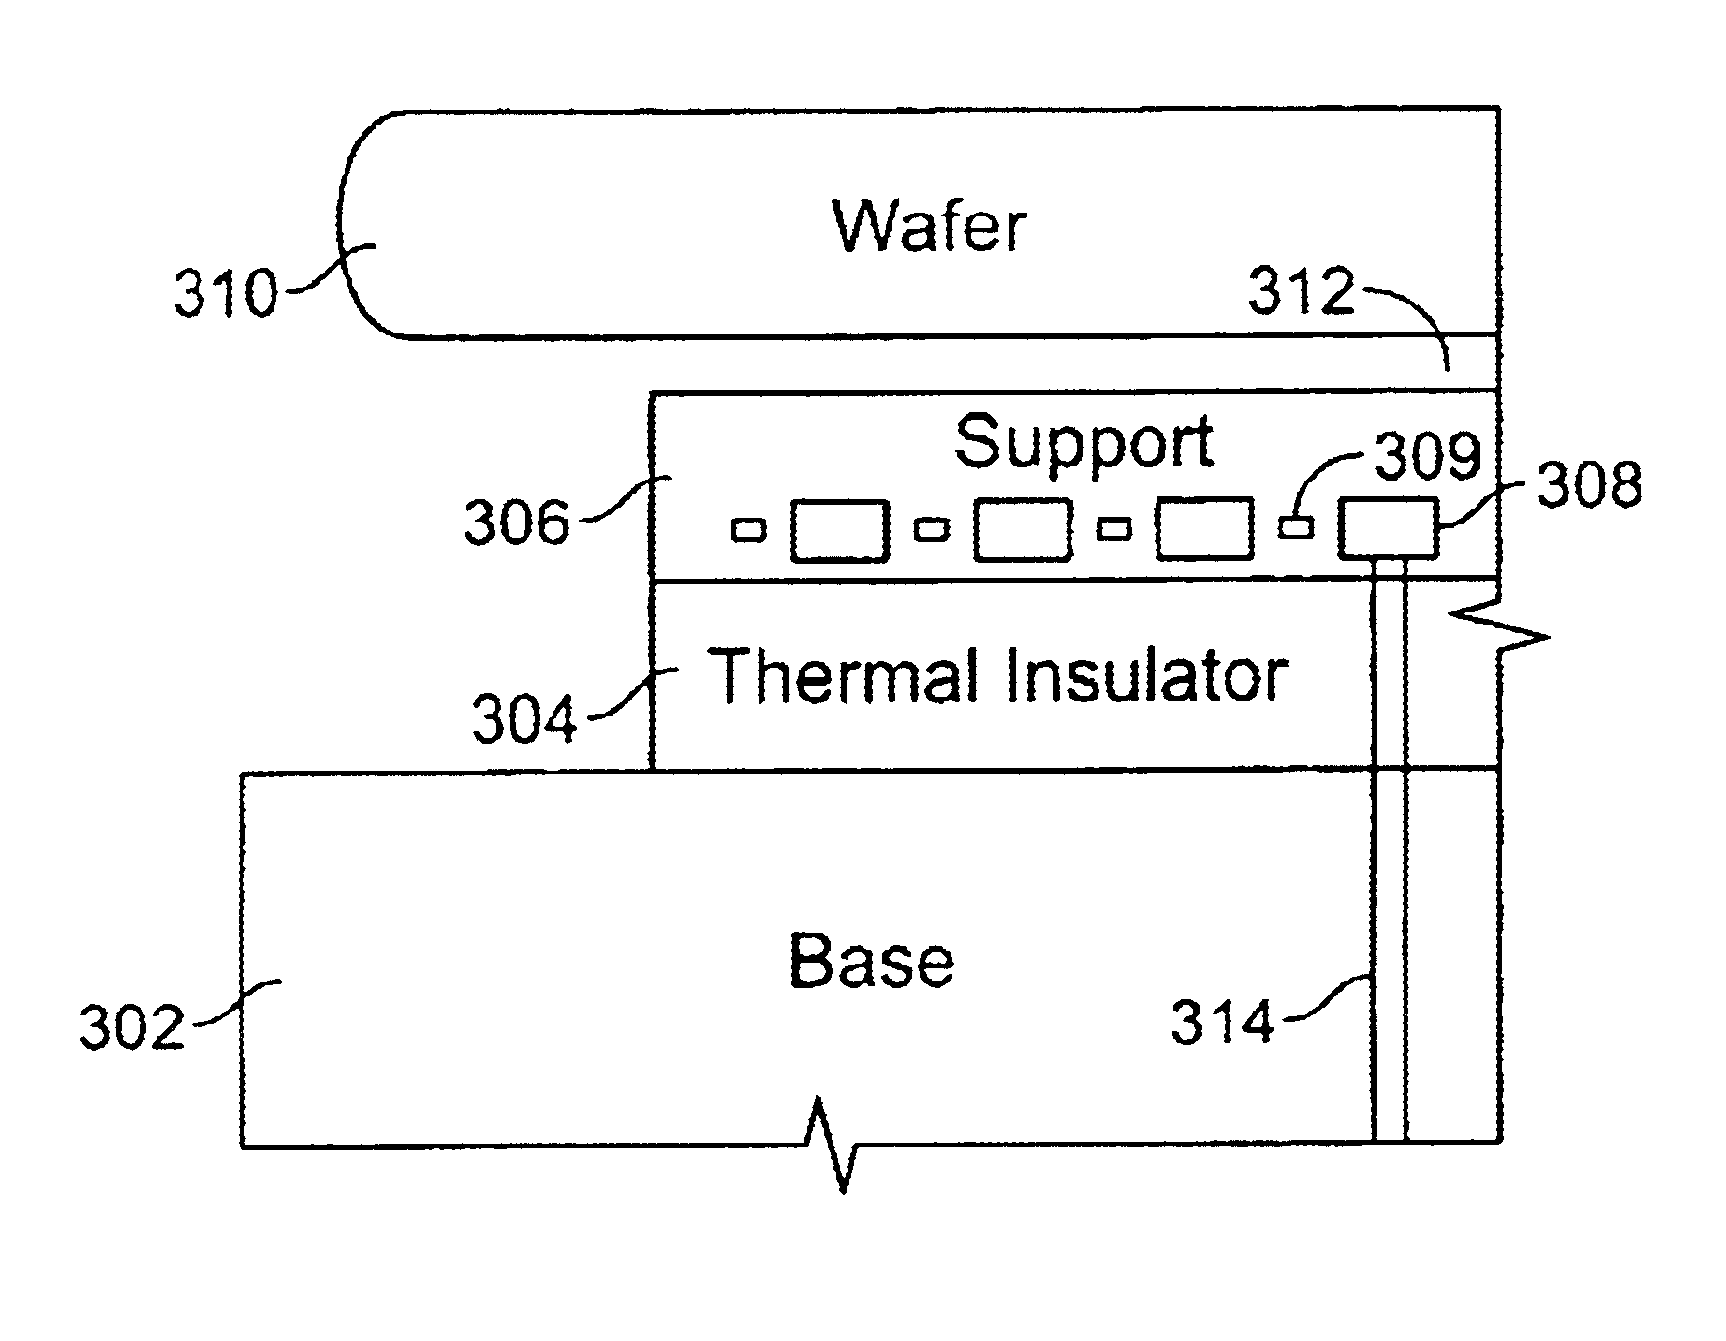 Method and apparatus for controlling the spatial temperature distribution across the surface of a workpiece support